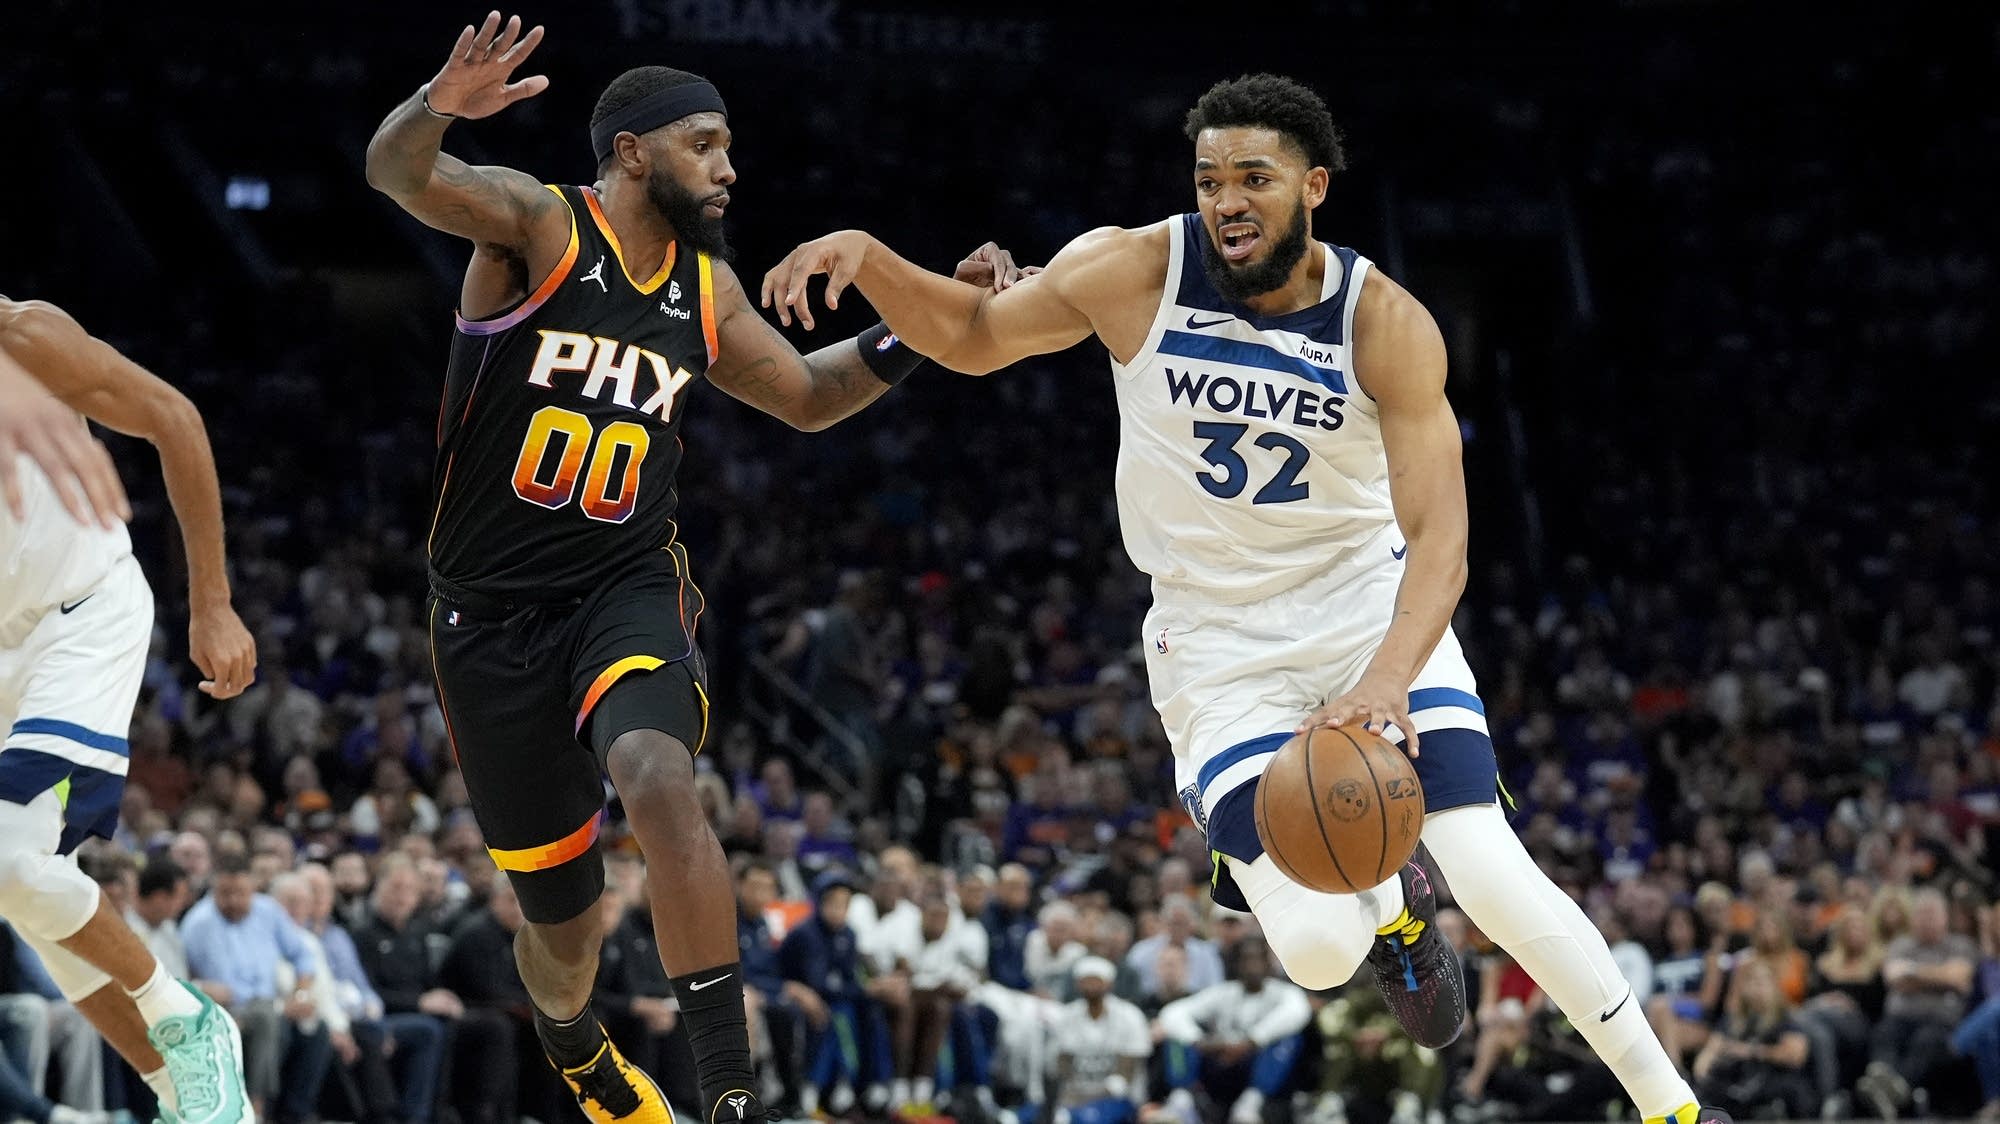 Anthony Edwards scores 36 points, Timberwolves beat Suns 126-109 for 3-0 series lead